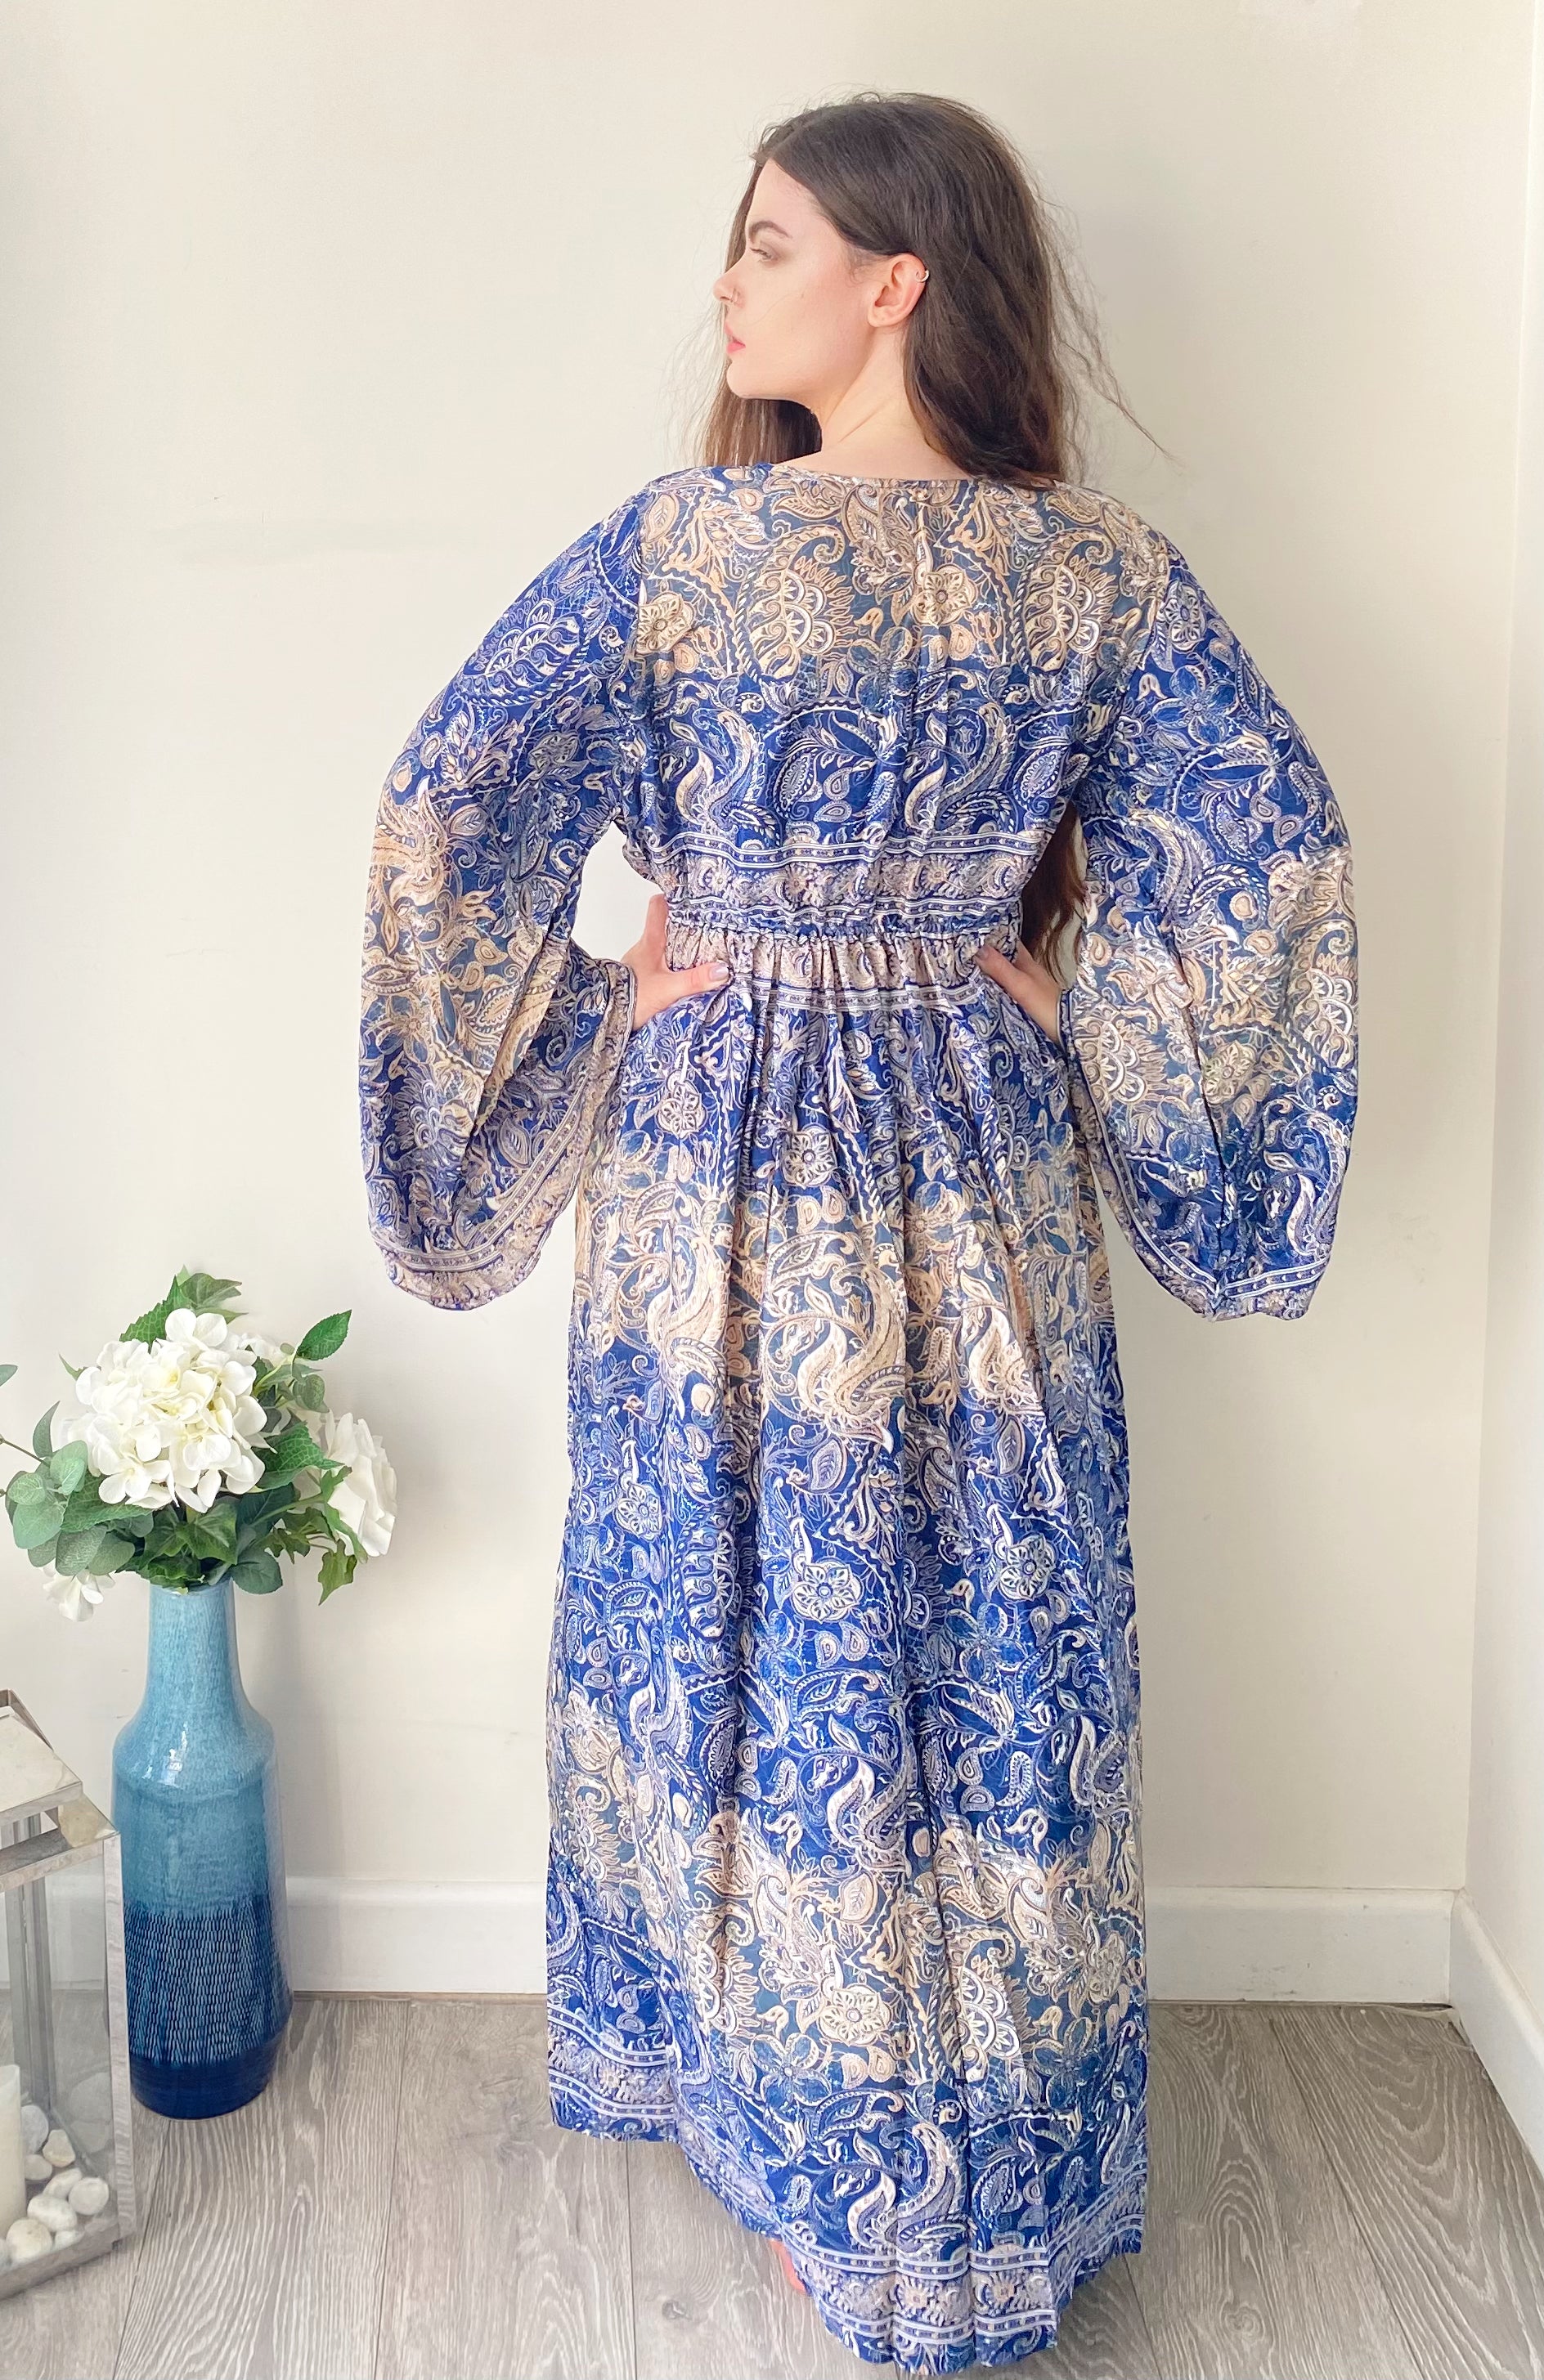 Shop boho dresses, tops, jumpsuits and sustainable clothing